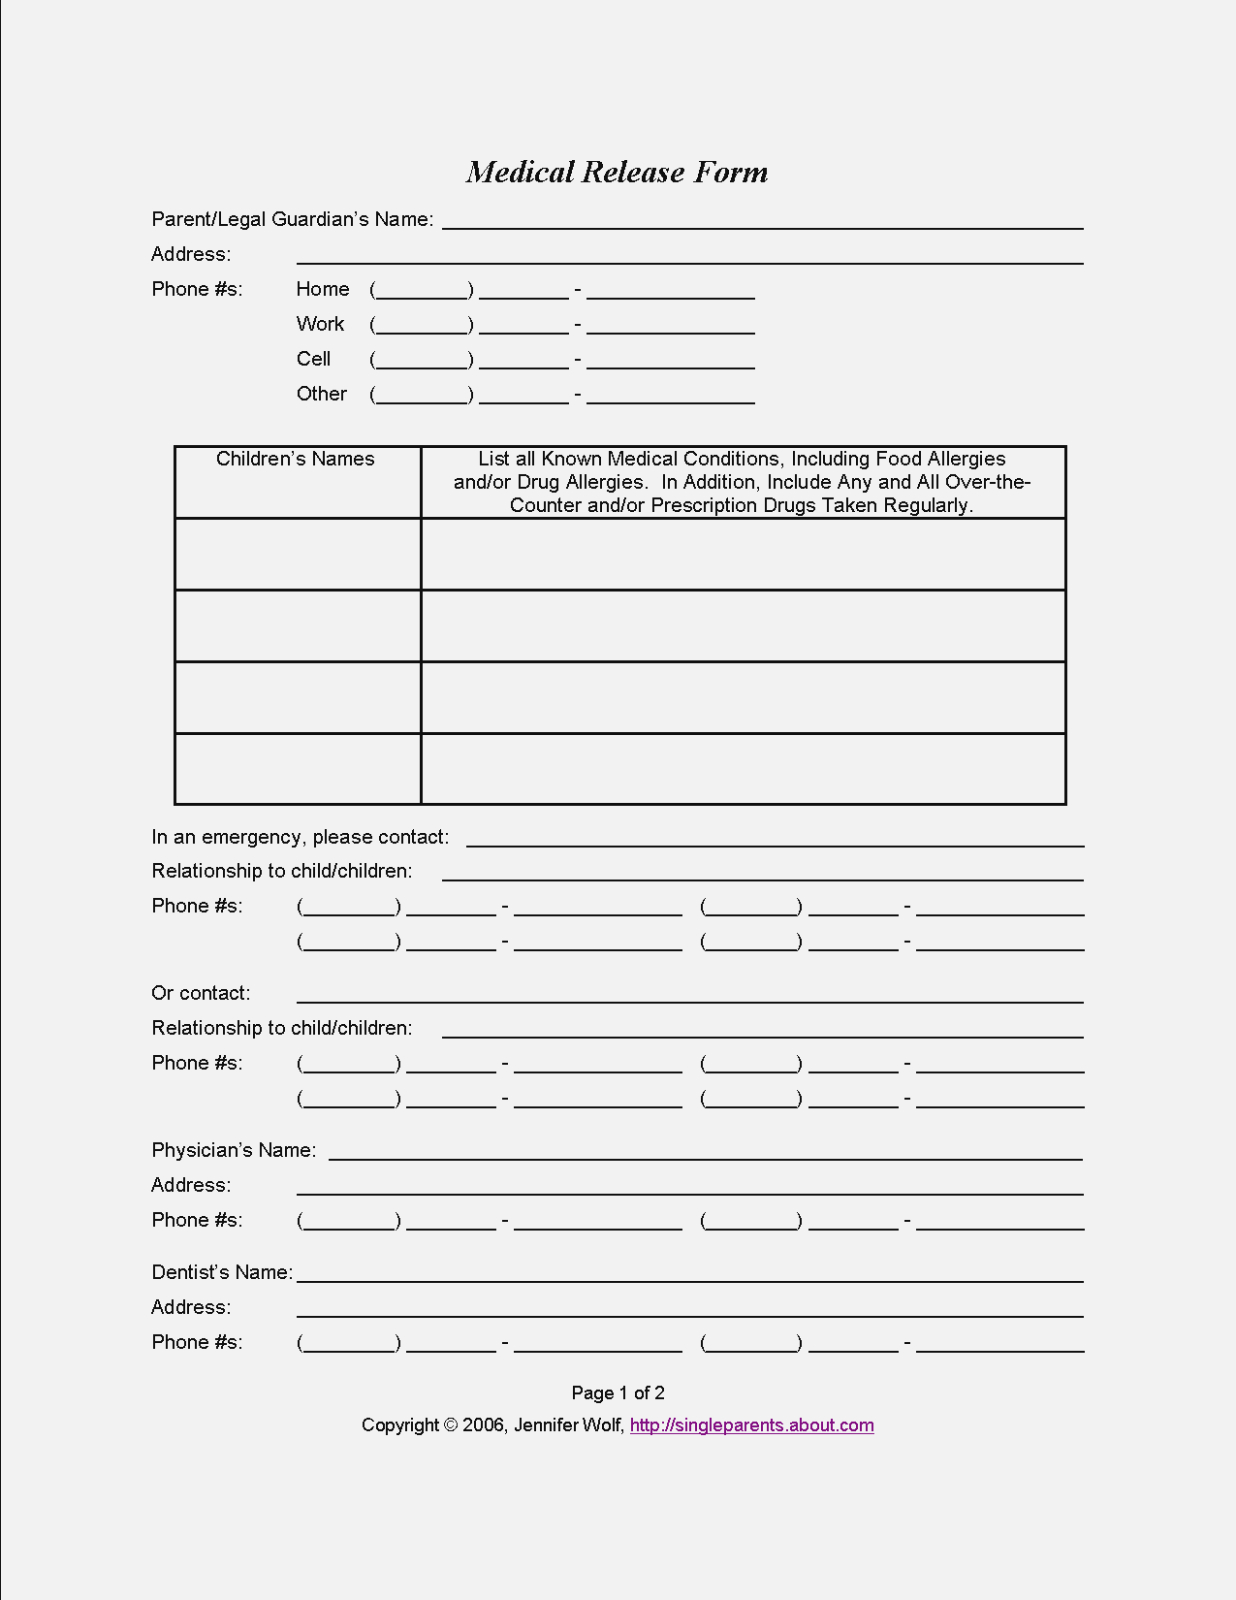 Do You Have A Medical Release Form For Your Kids? | Travel .. – The - Free Printable Medical Release Form